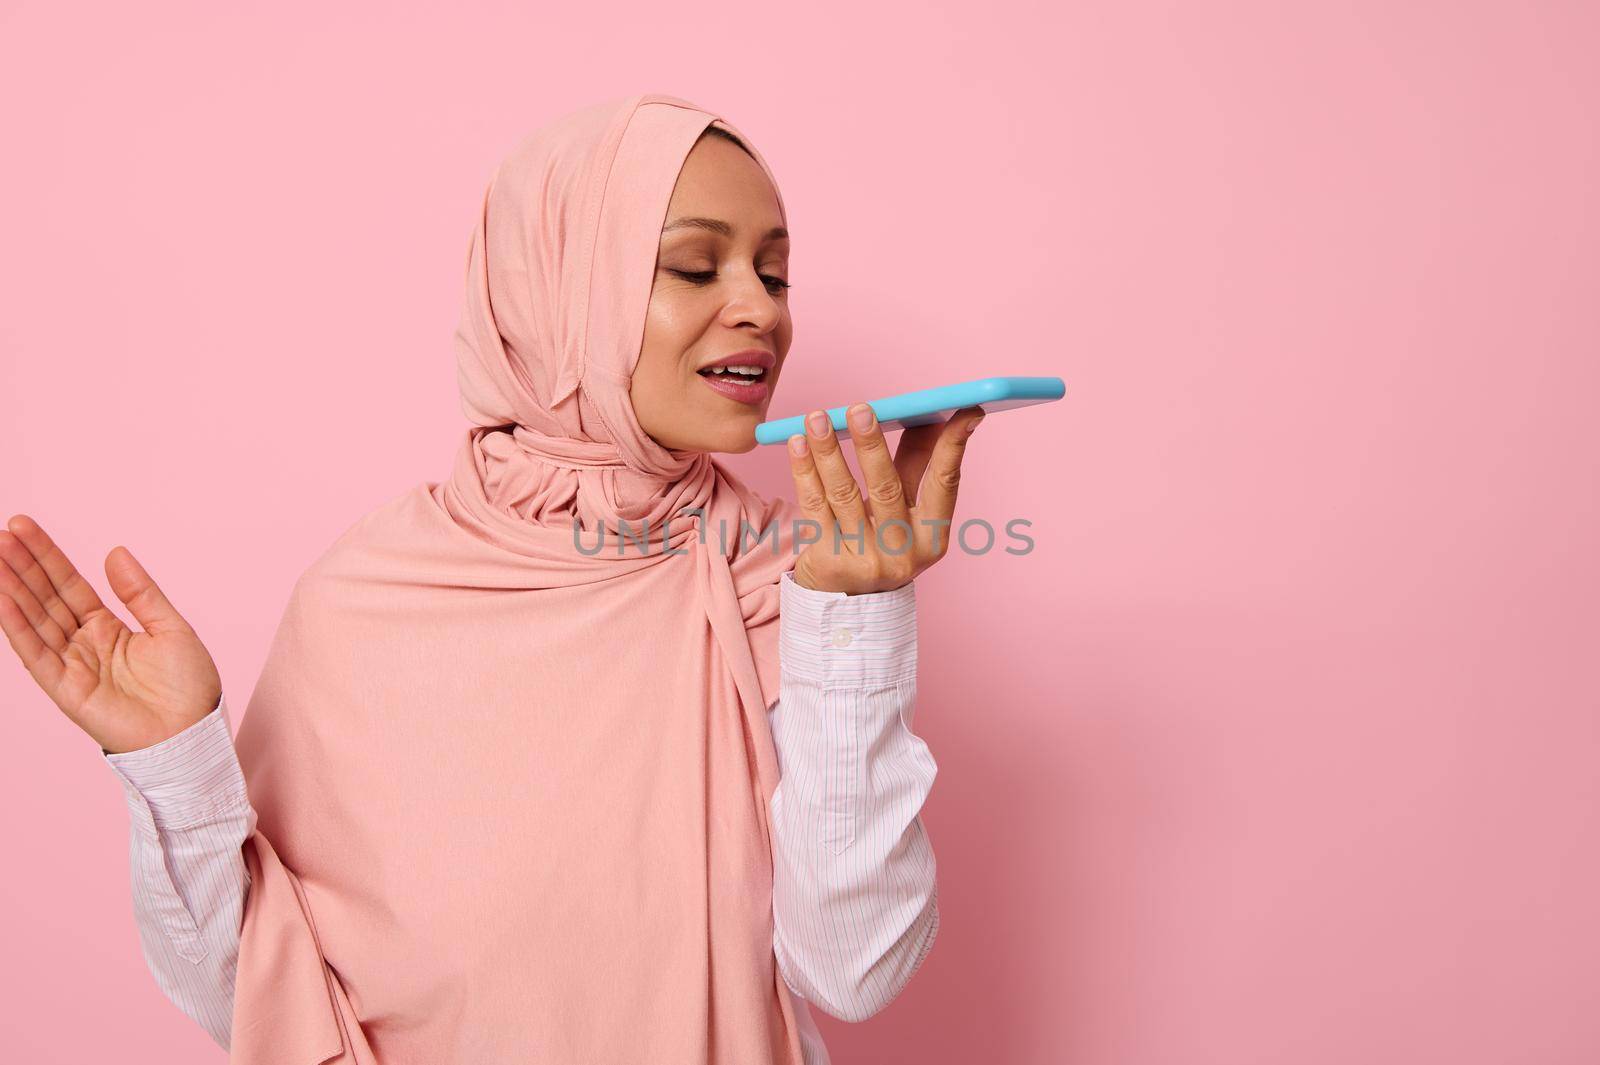 Muslim Arab gorgeous beautiful woman with covered head in pink hijab recording a voice message on her smartphone. Isolated portrait on pink pastel background, copy space for advertising